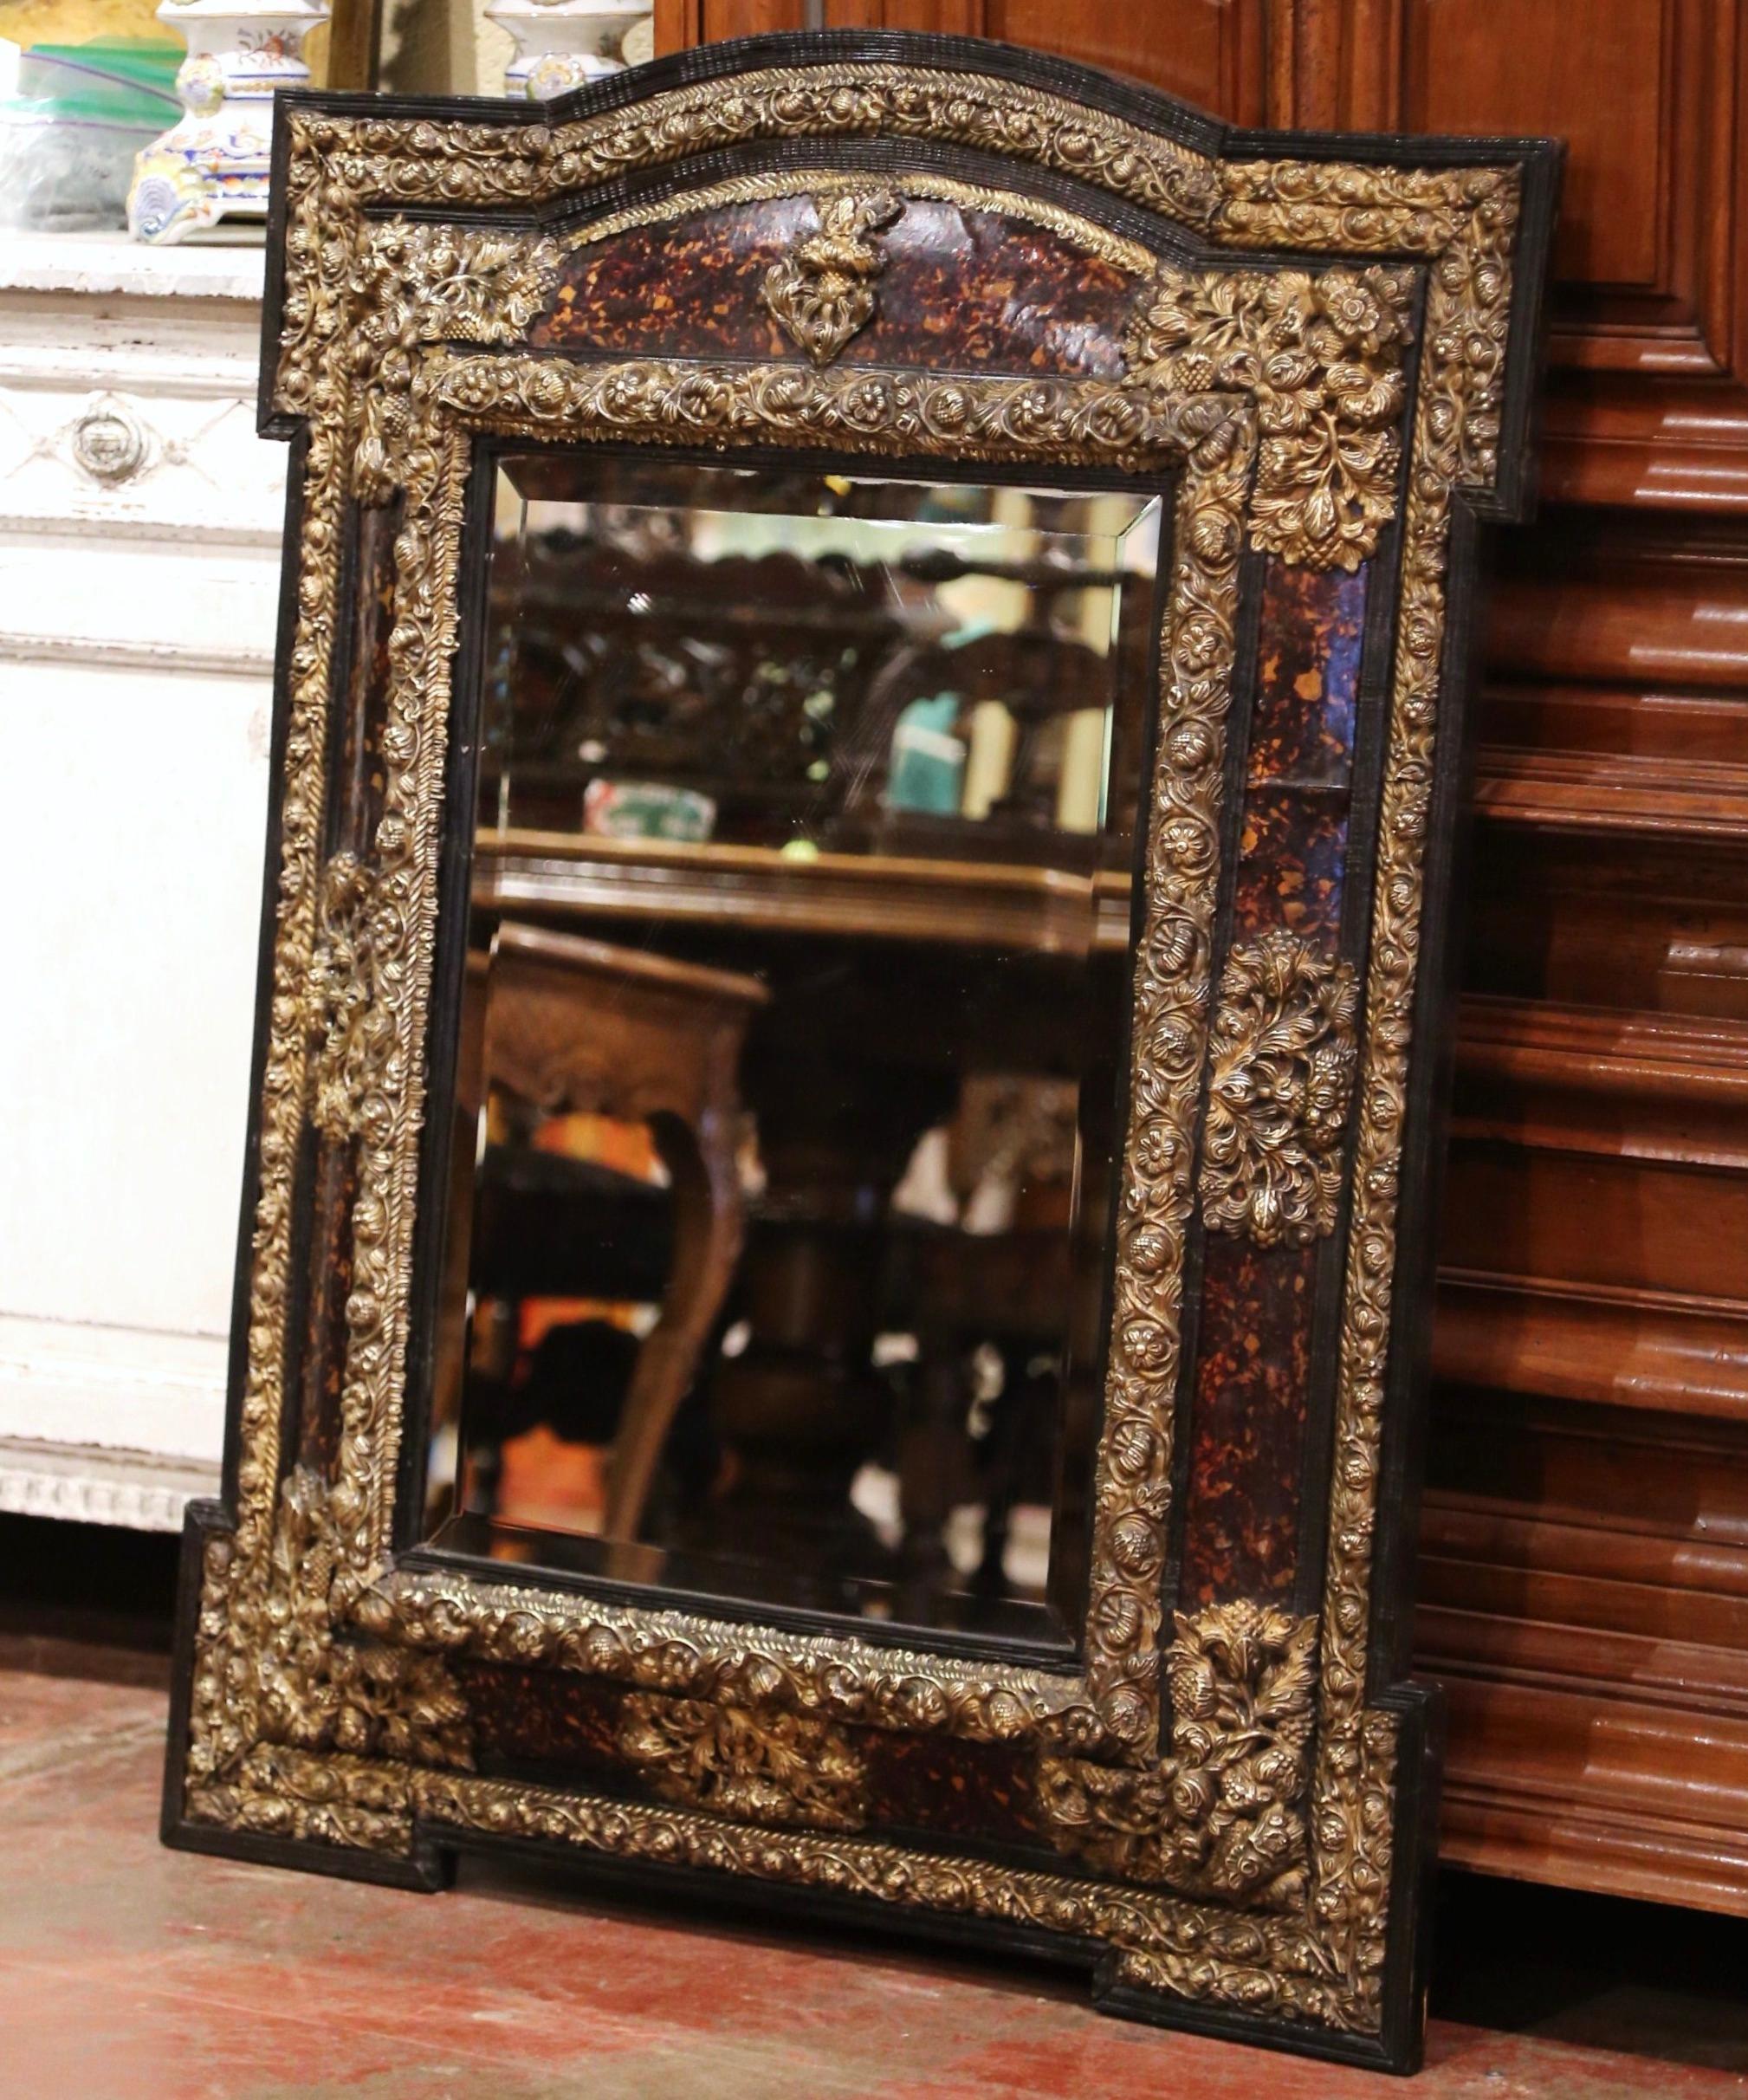 Created in France, circa 1870, the elegant antique wall mirror with overhang corners is rectangular in shape embellished with an arched top. The mirror is decorated with intricate brass repousse floral and fruit motifs in high relief all around the